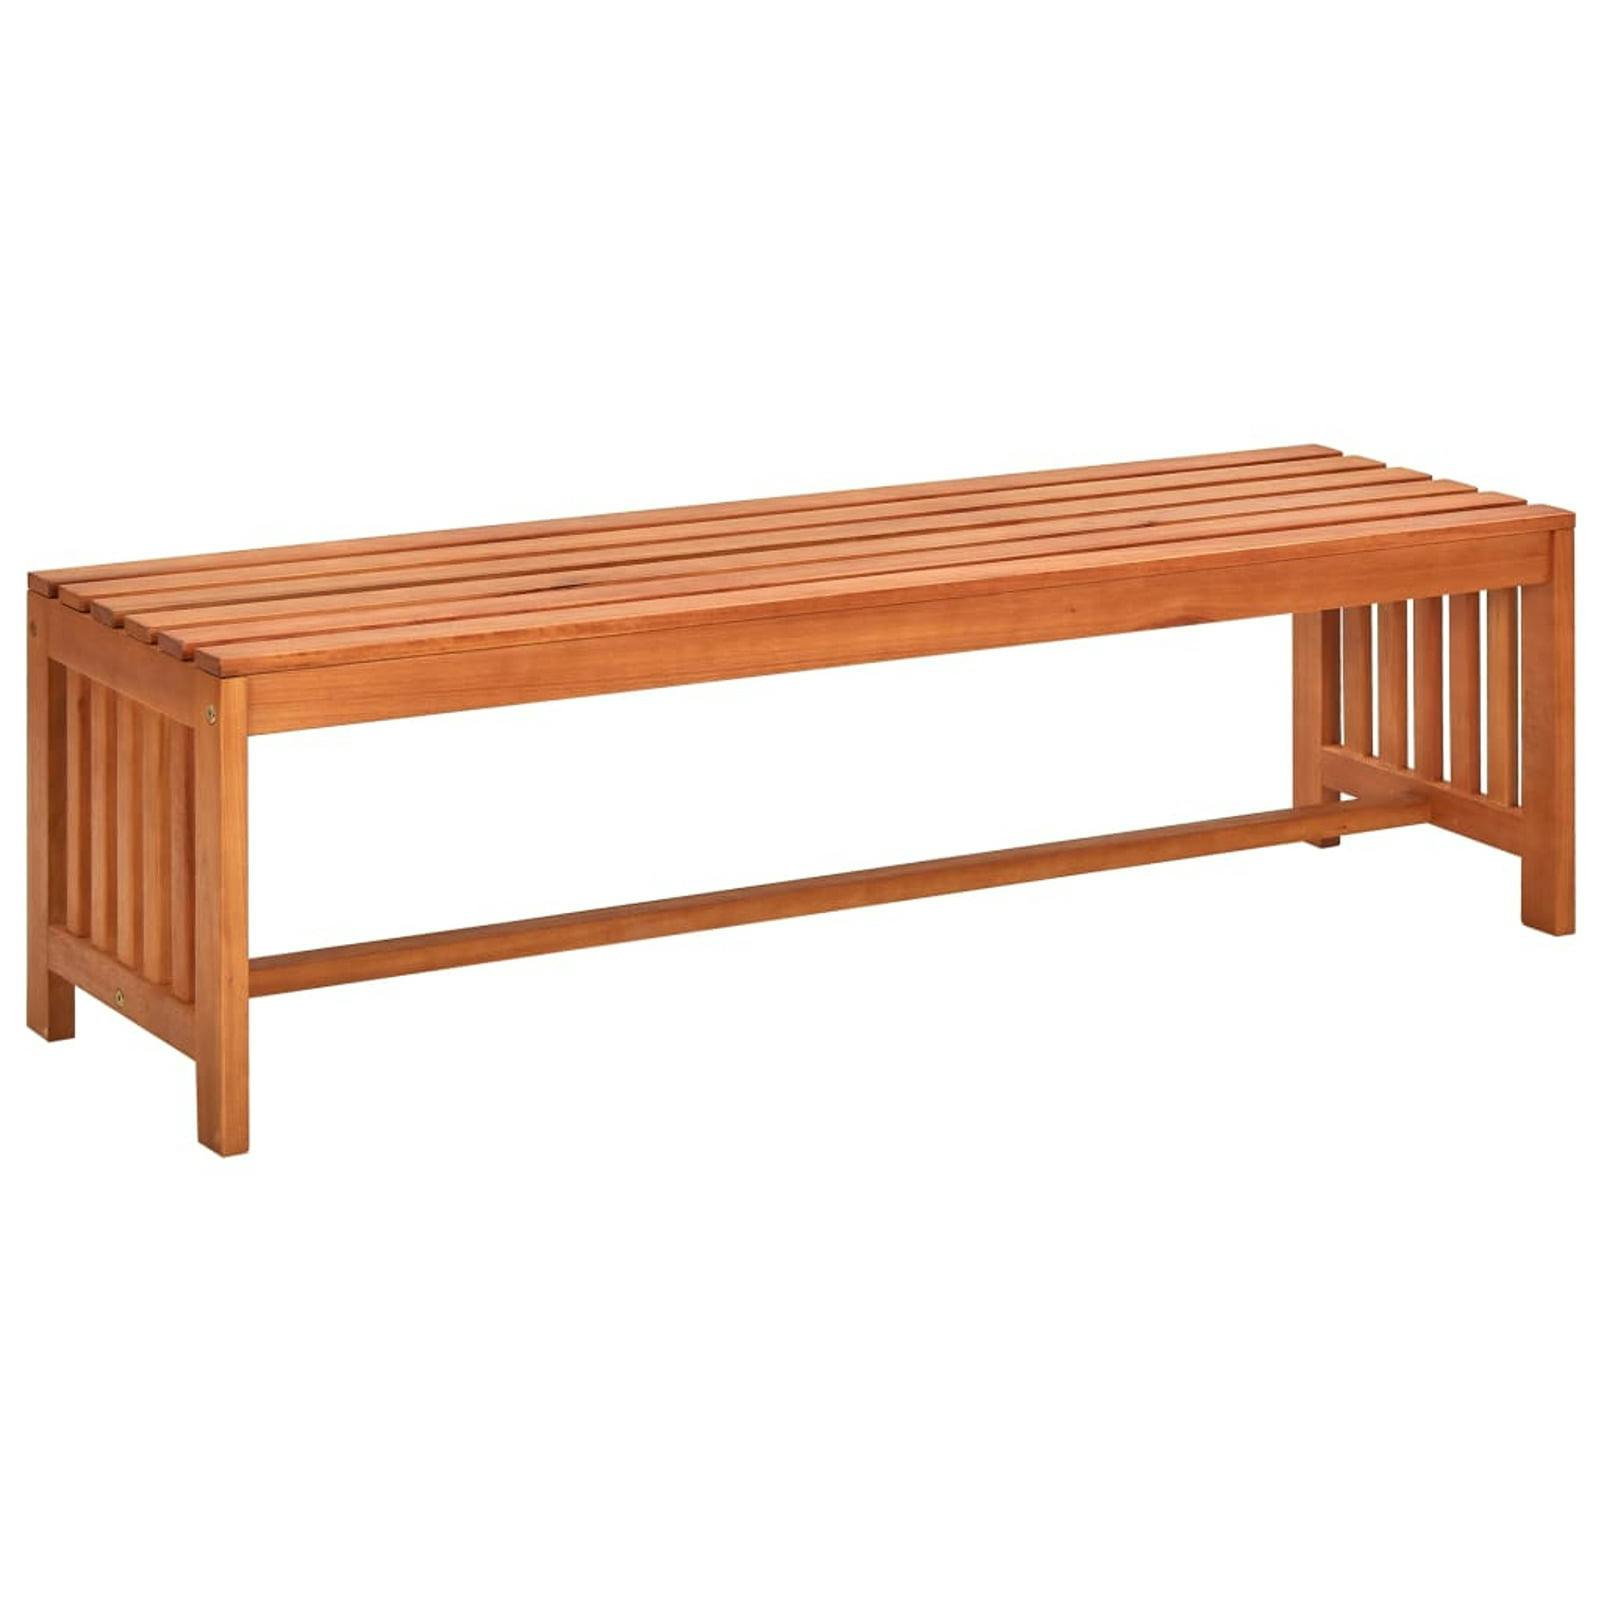 Eucalyptus Wood Outdoor Patio Bench 51.2" Oil-Finished Brown